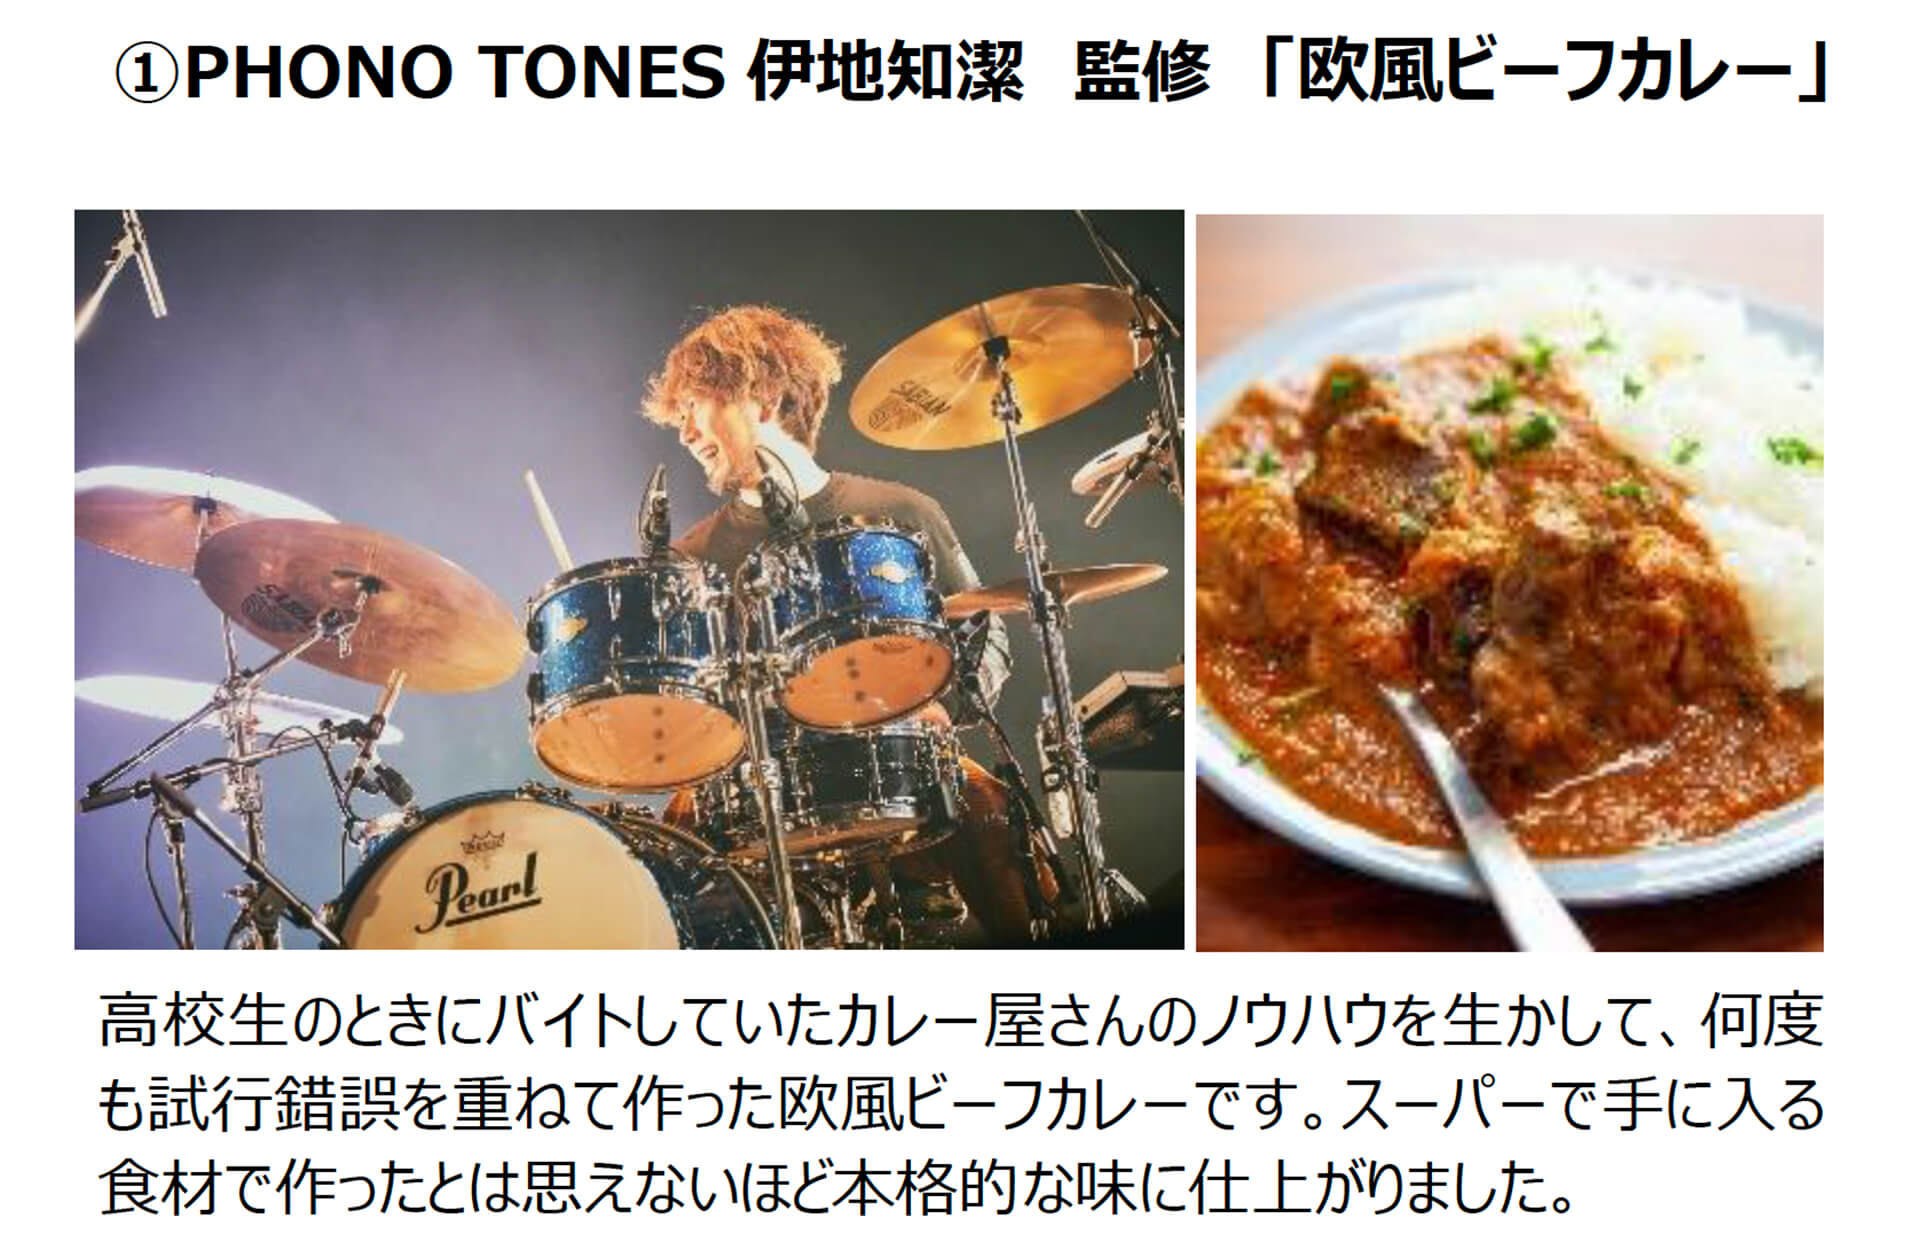 CURRY&MUSIC JAPAN